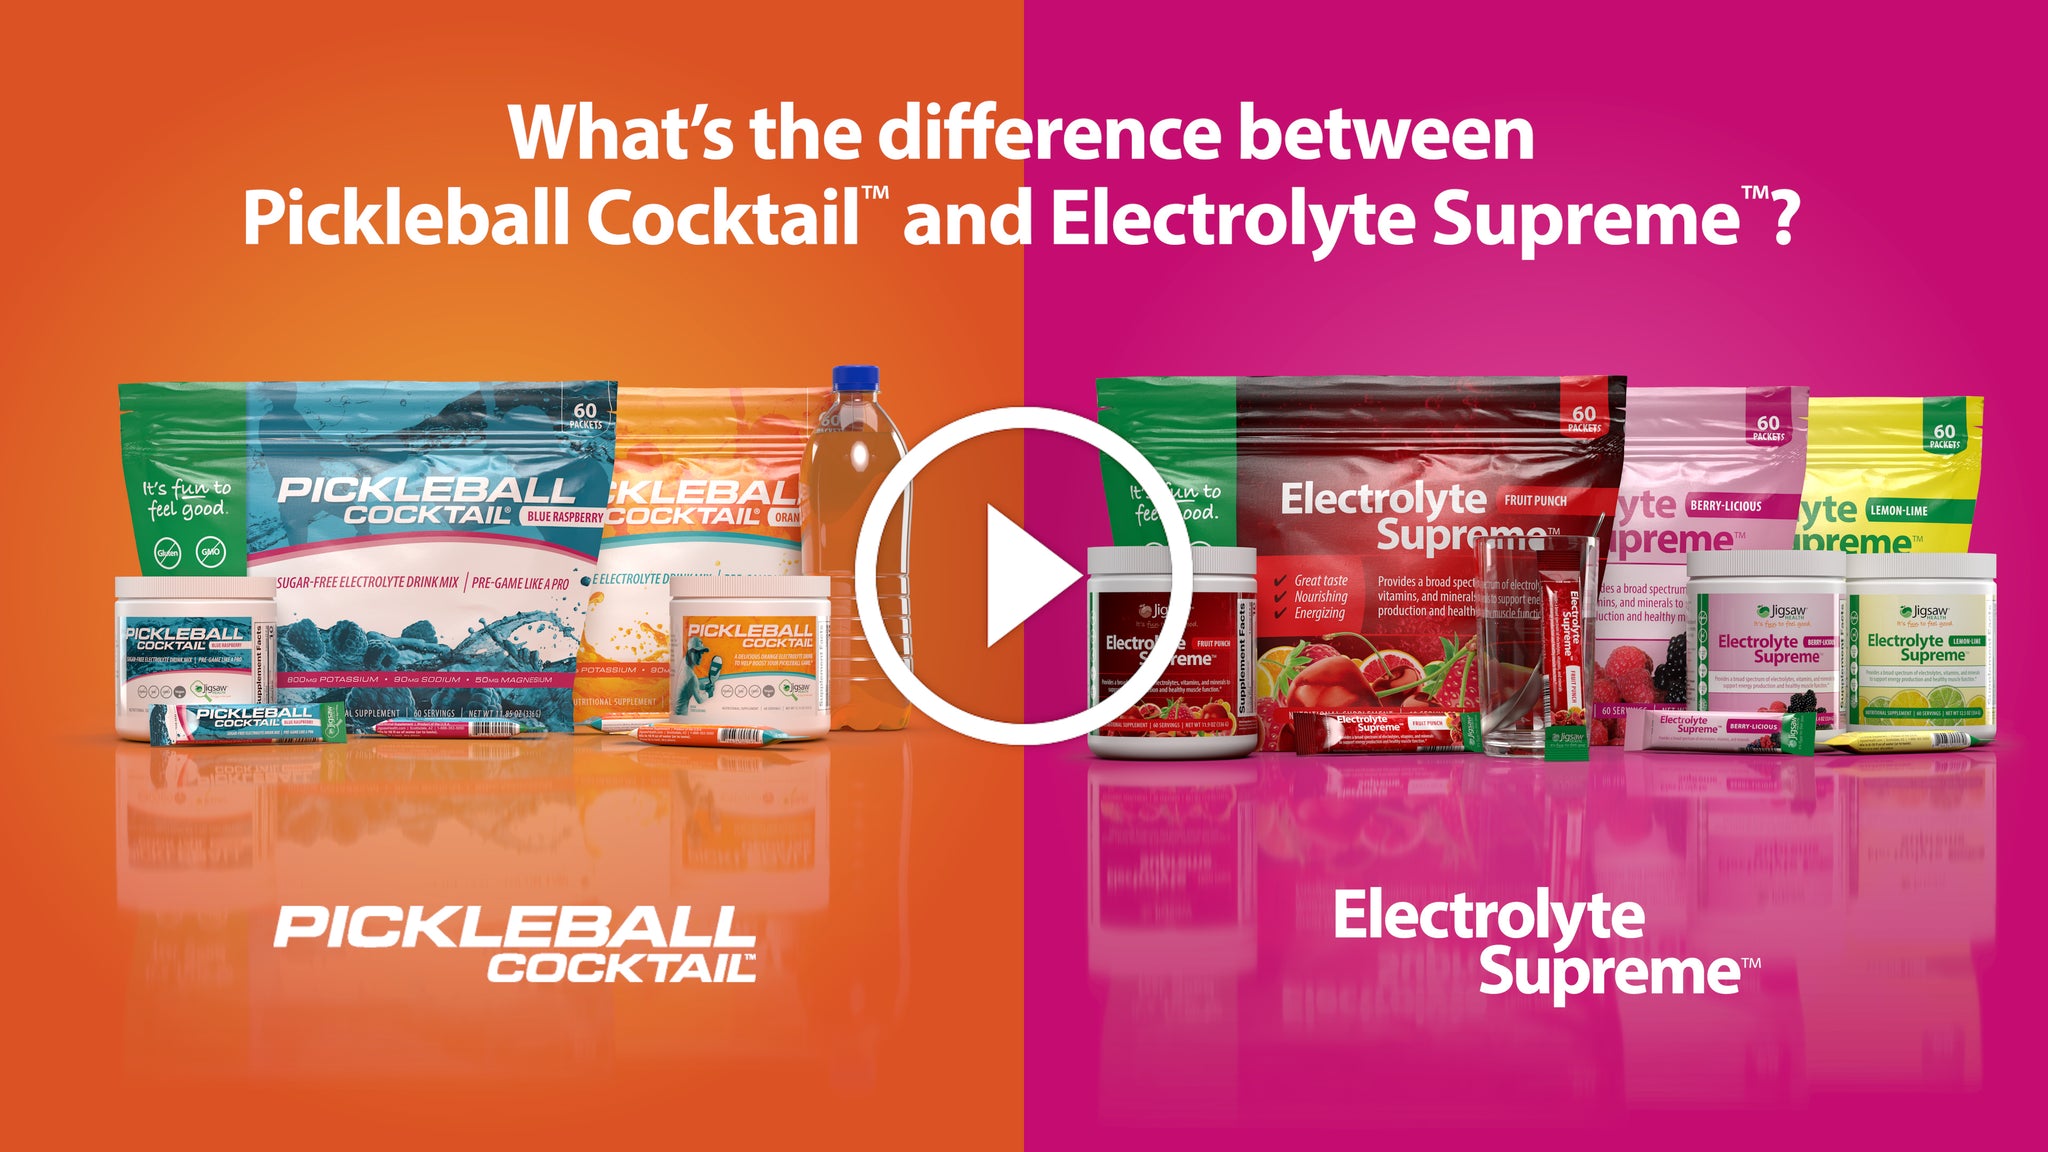 What's the difference between Pickleball Cocktail and Electrolyte Supreme?